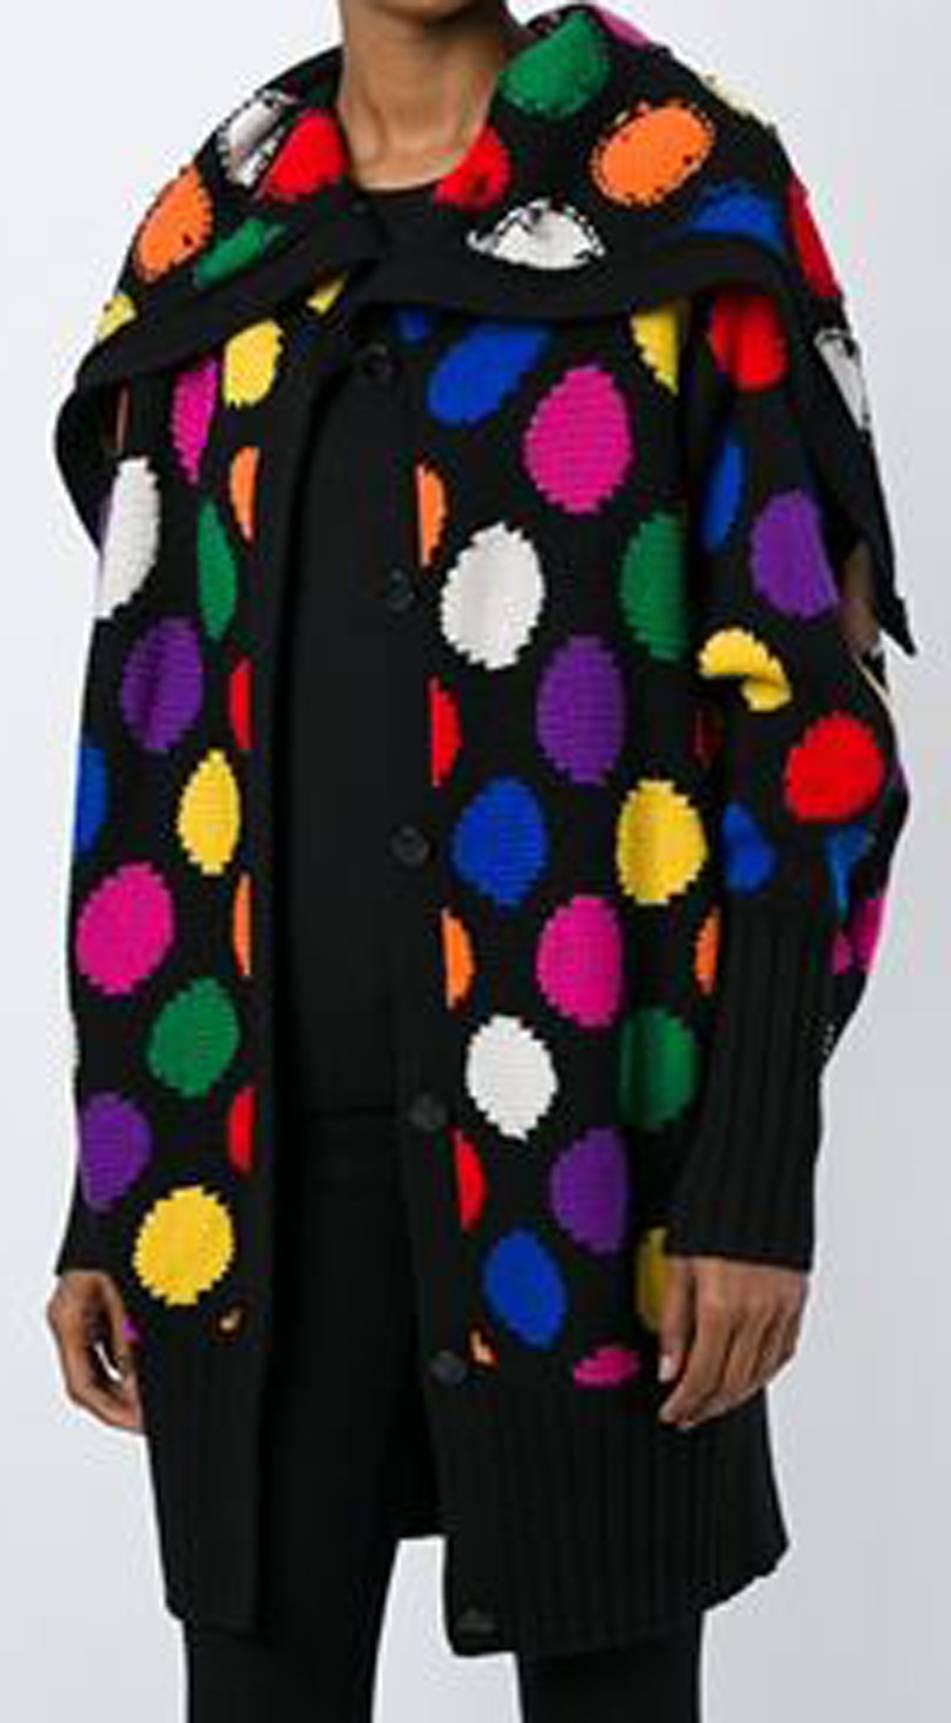 Jc De Castelbajac multicolour wool blend dot oversized jacket featuring a centre front logo button fastening and a large rolled collar. 
In good vintage condition. Made in France.
Label size:S  Estimated size: Large S/M
We guarantee you will receive